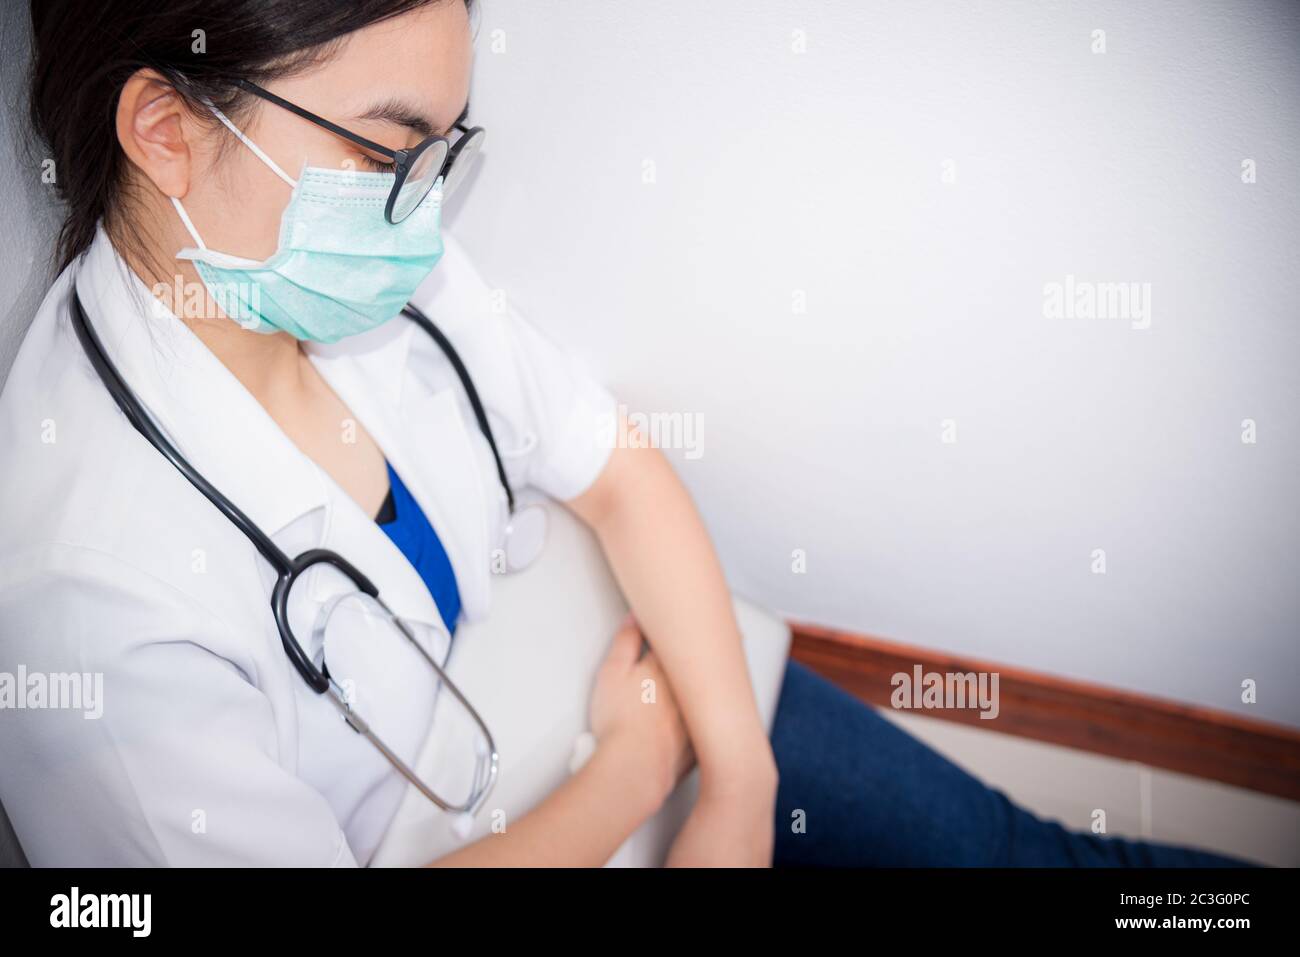 Woman doctor sleeping with exhaustion Stock Photo